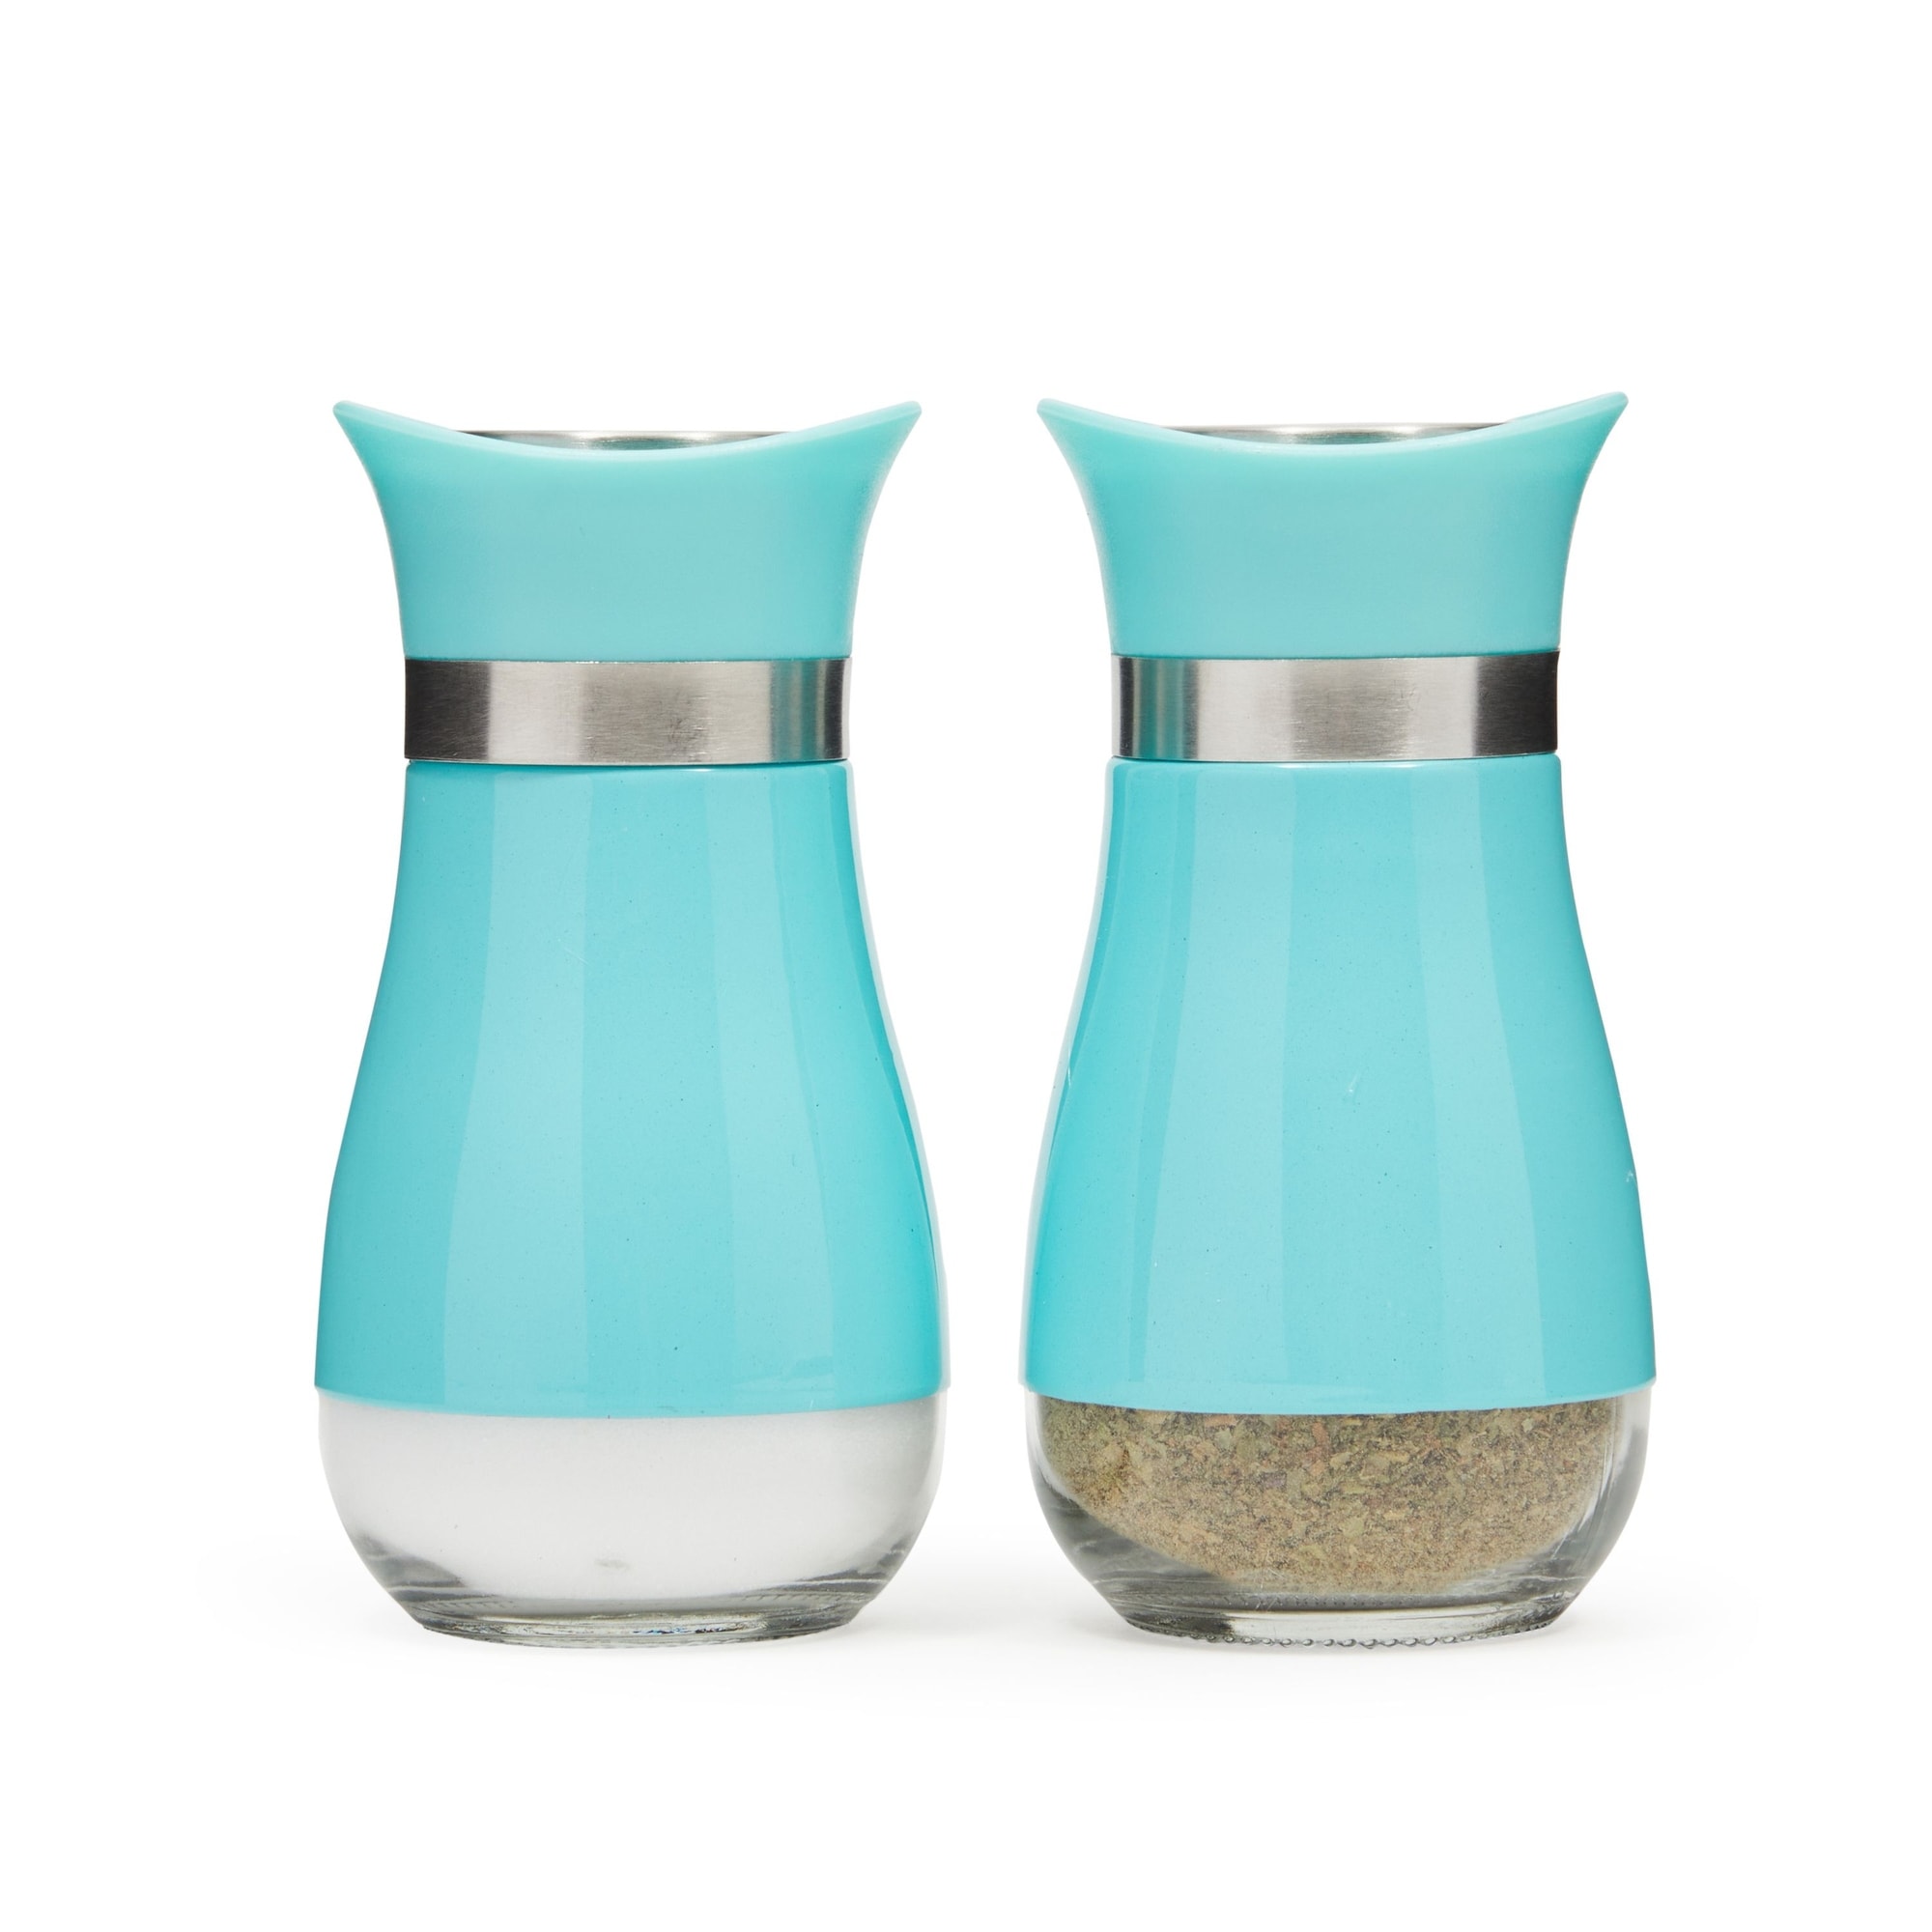 Teal Salt and Pepper Shakers Set by Brighter Barns - Turquoise Kitchen  Decor & Teal Kitchen Accessories - Cute Modern Farmhouse Glass Shakers for  Home